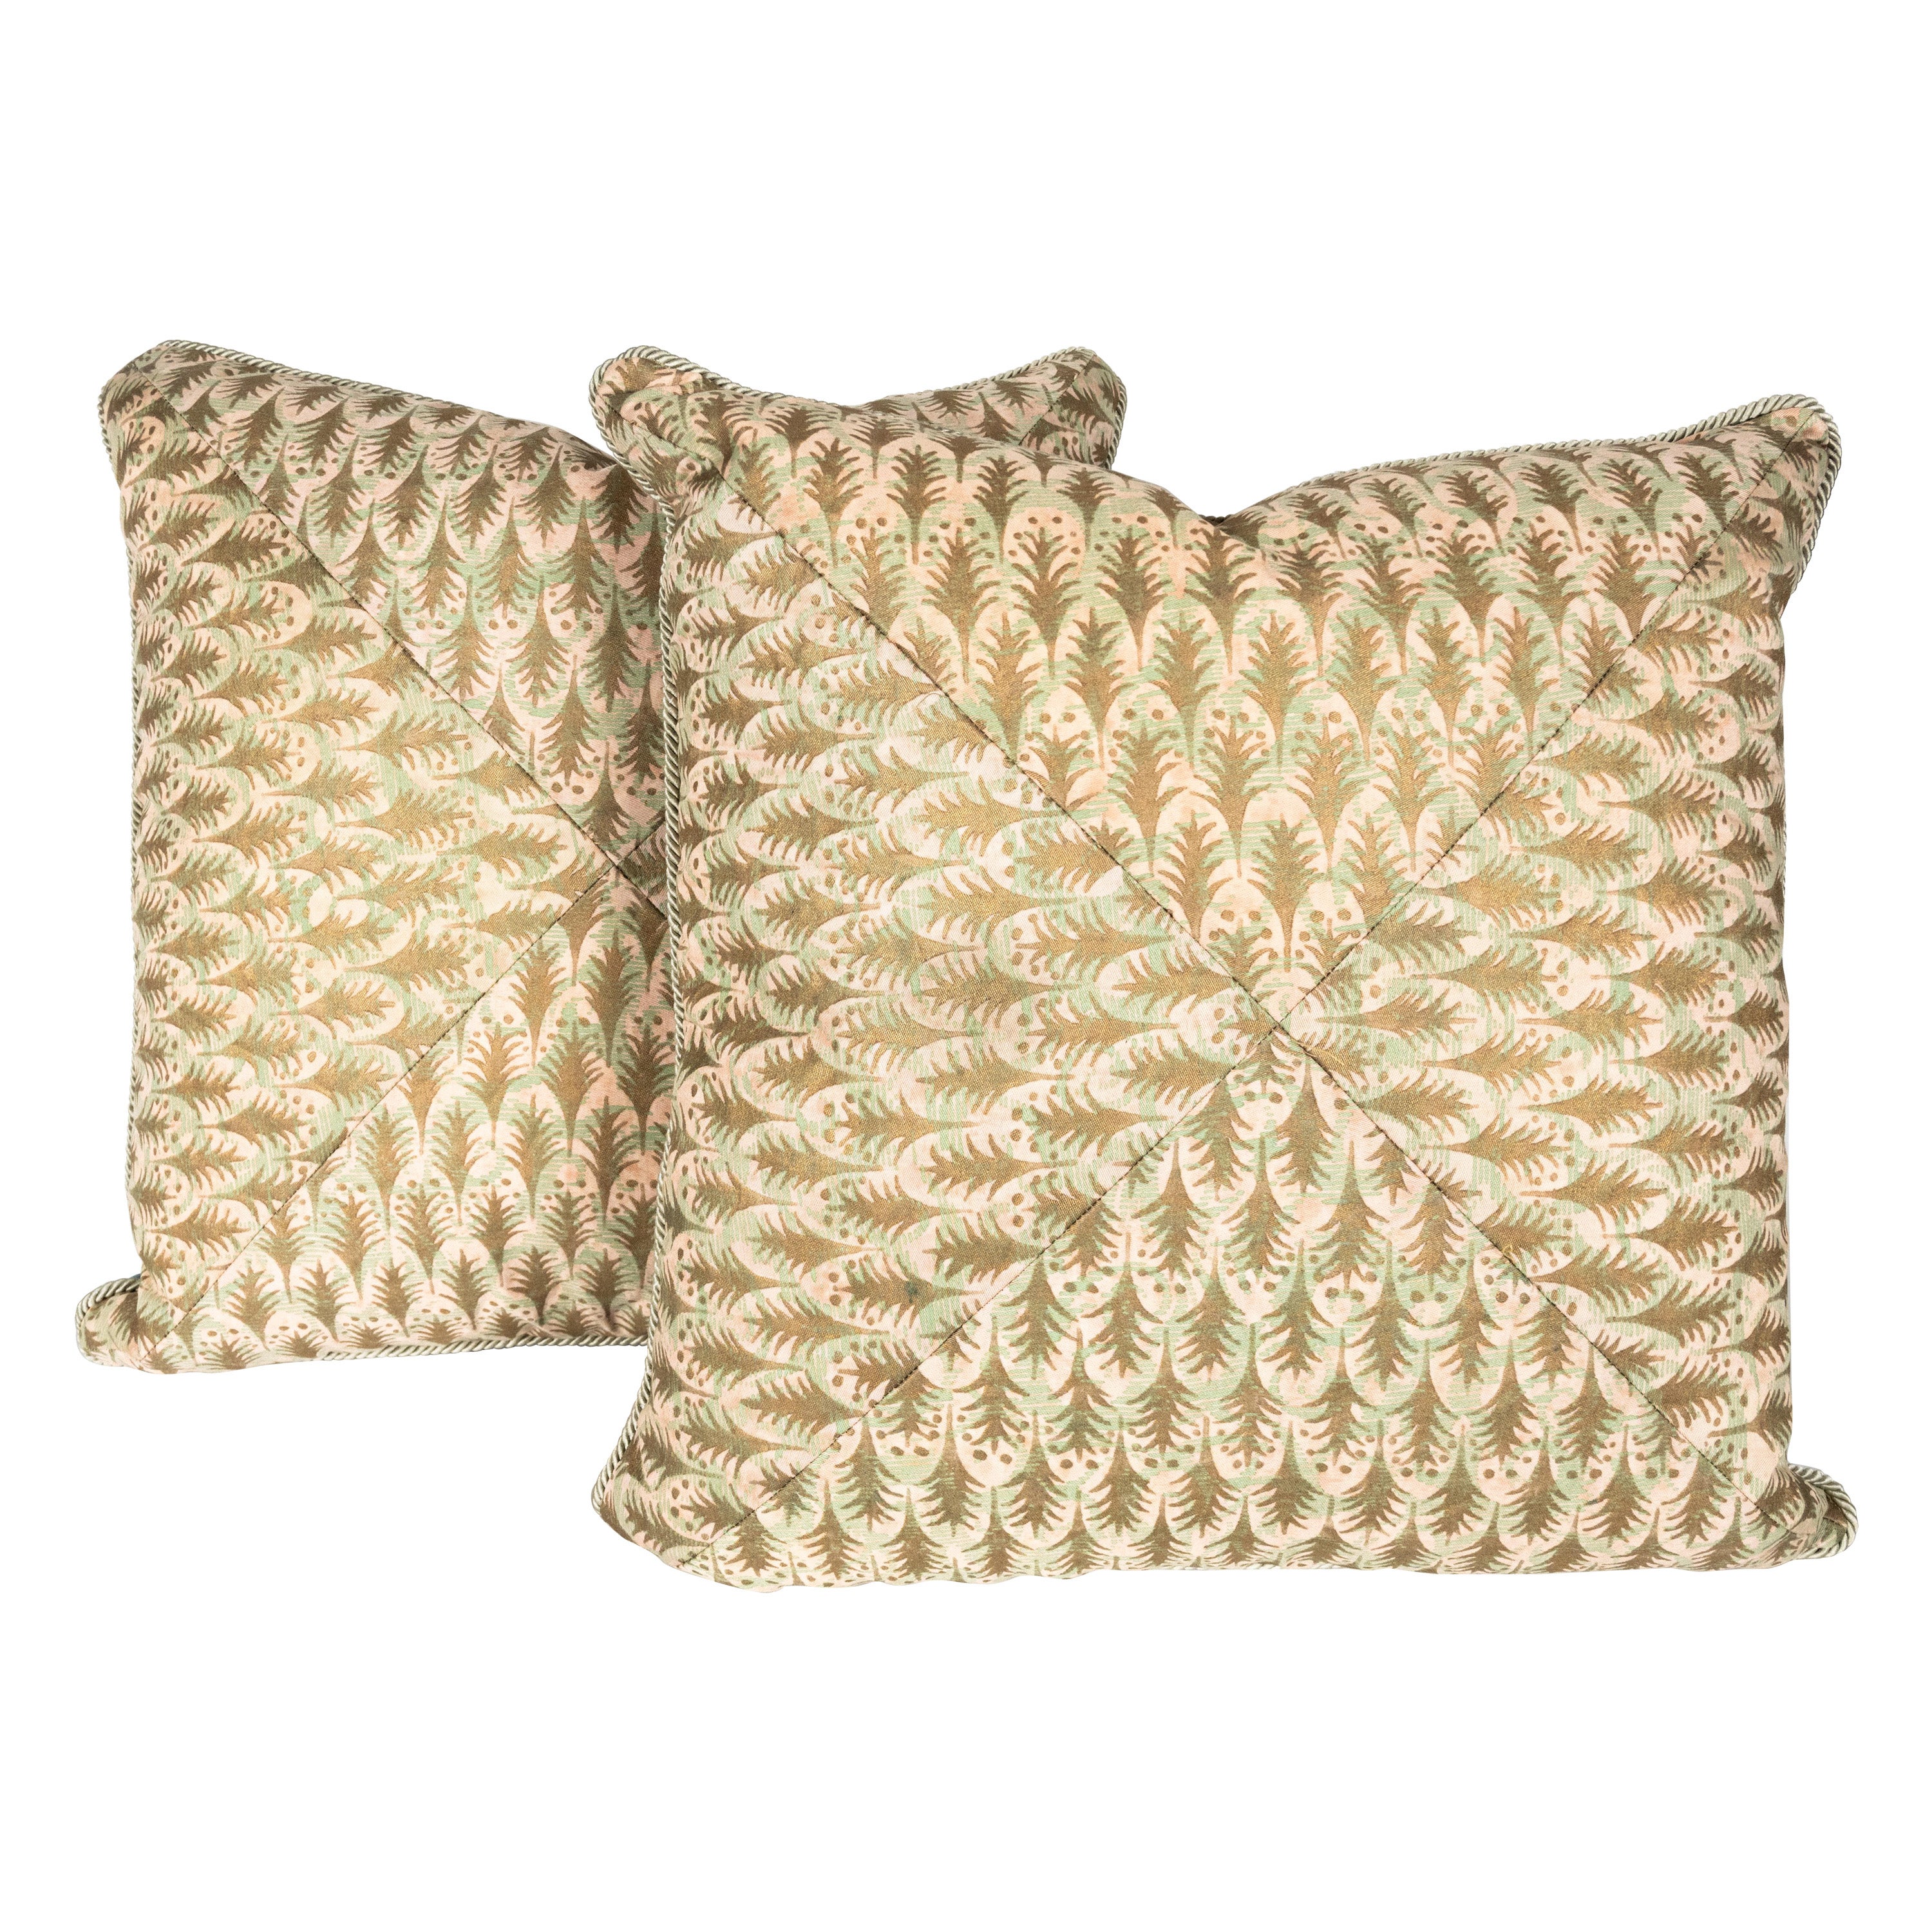 Pair of Mitered Fortuny Fabric Cushions in the Puimette Pattern